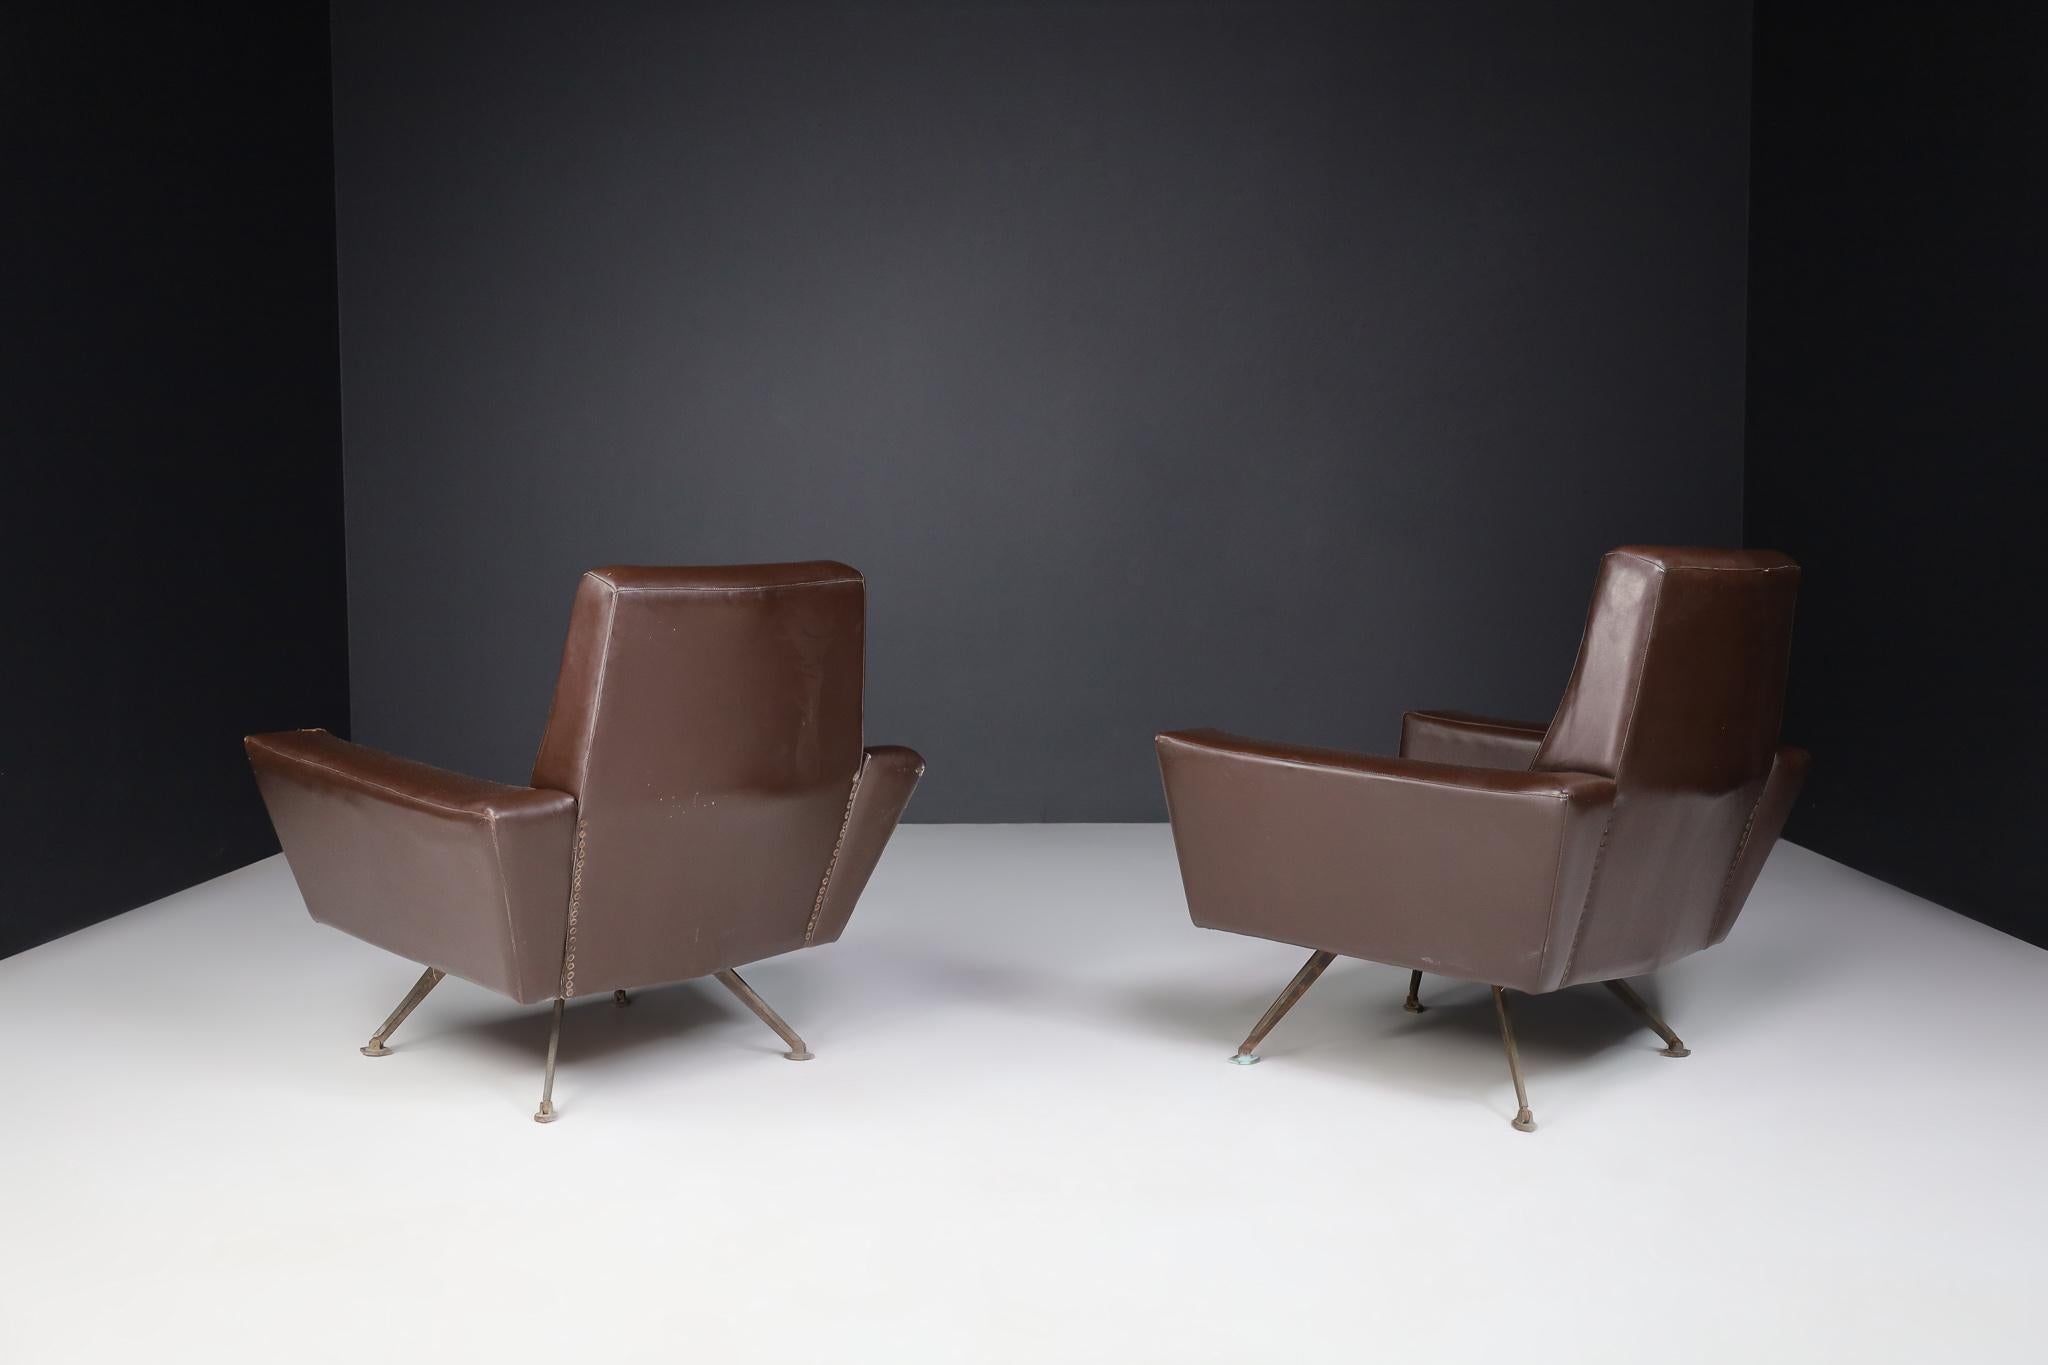 Italian Pair of Armchairs by Studio Tecnico Italy A.P.A. and Designed by Lenzi 1950s For Sale